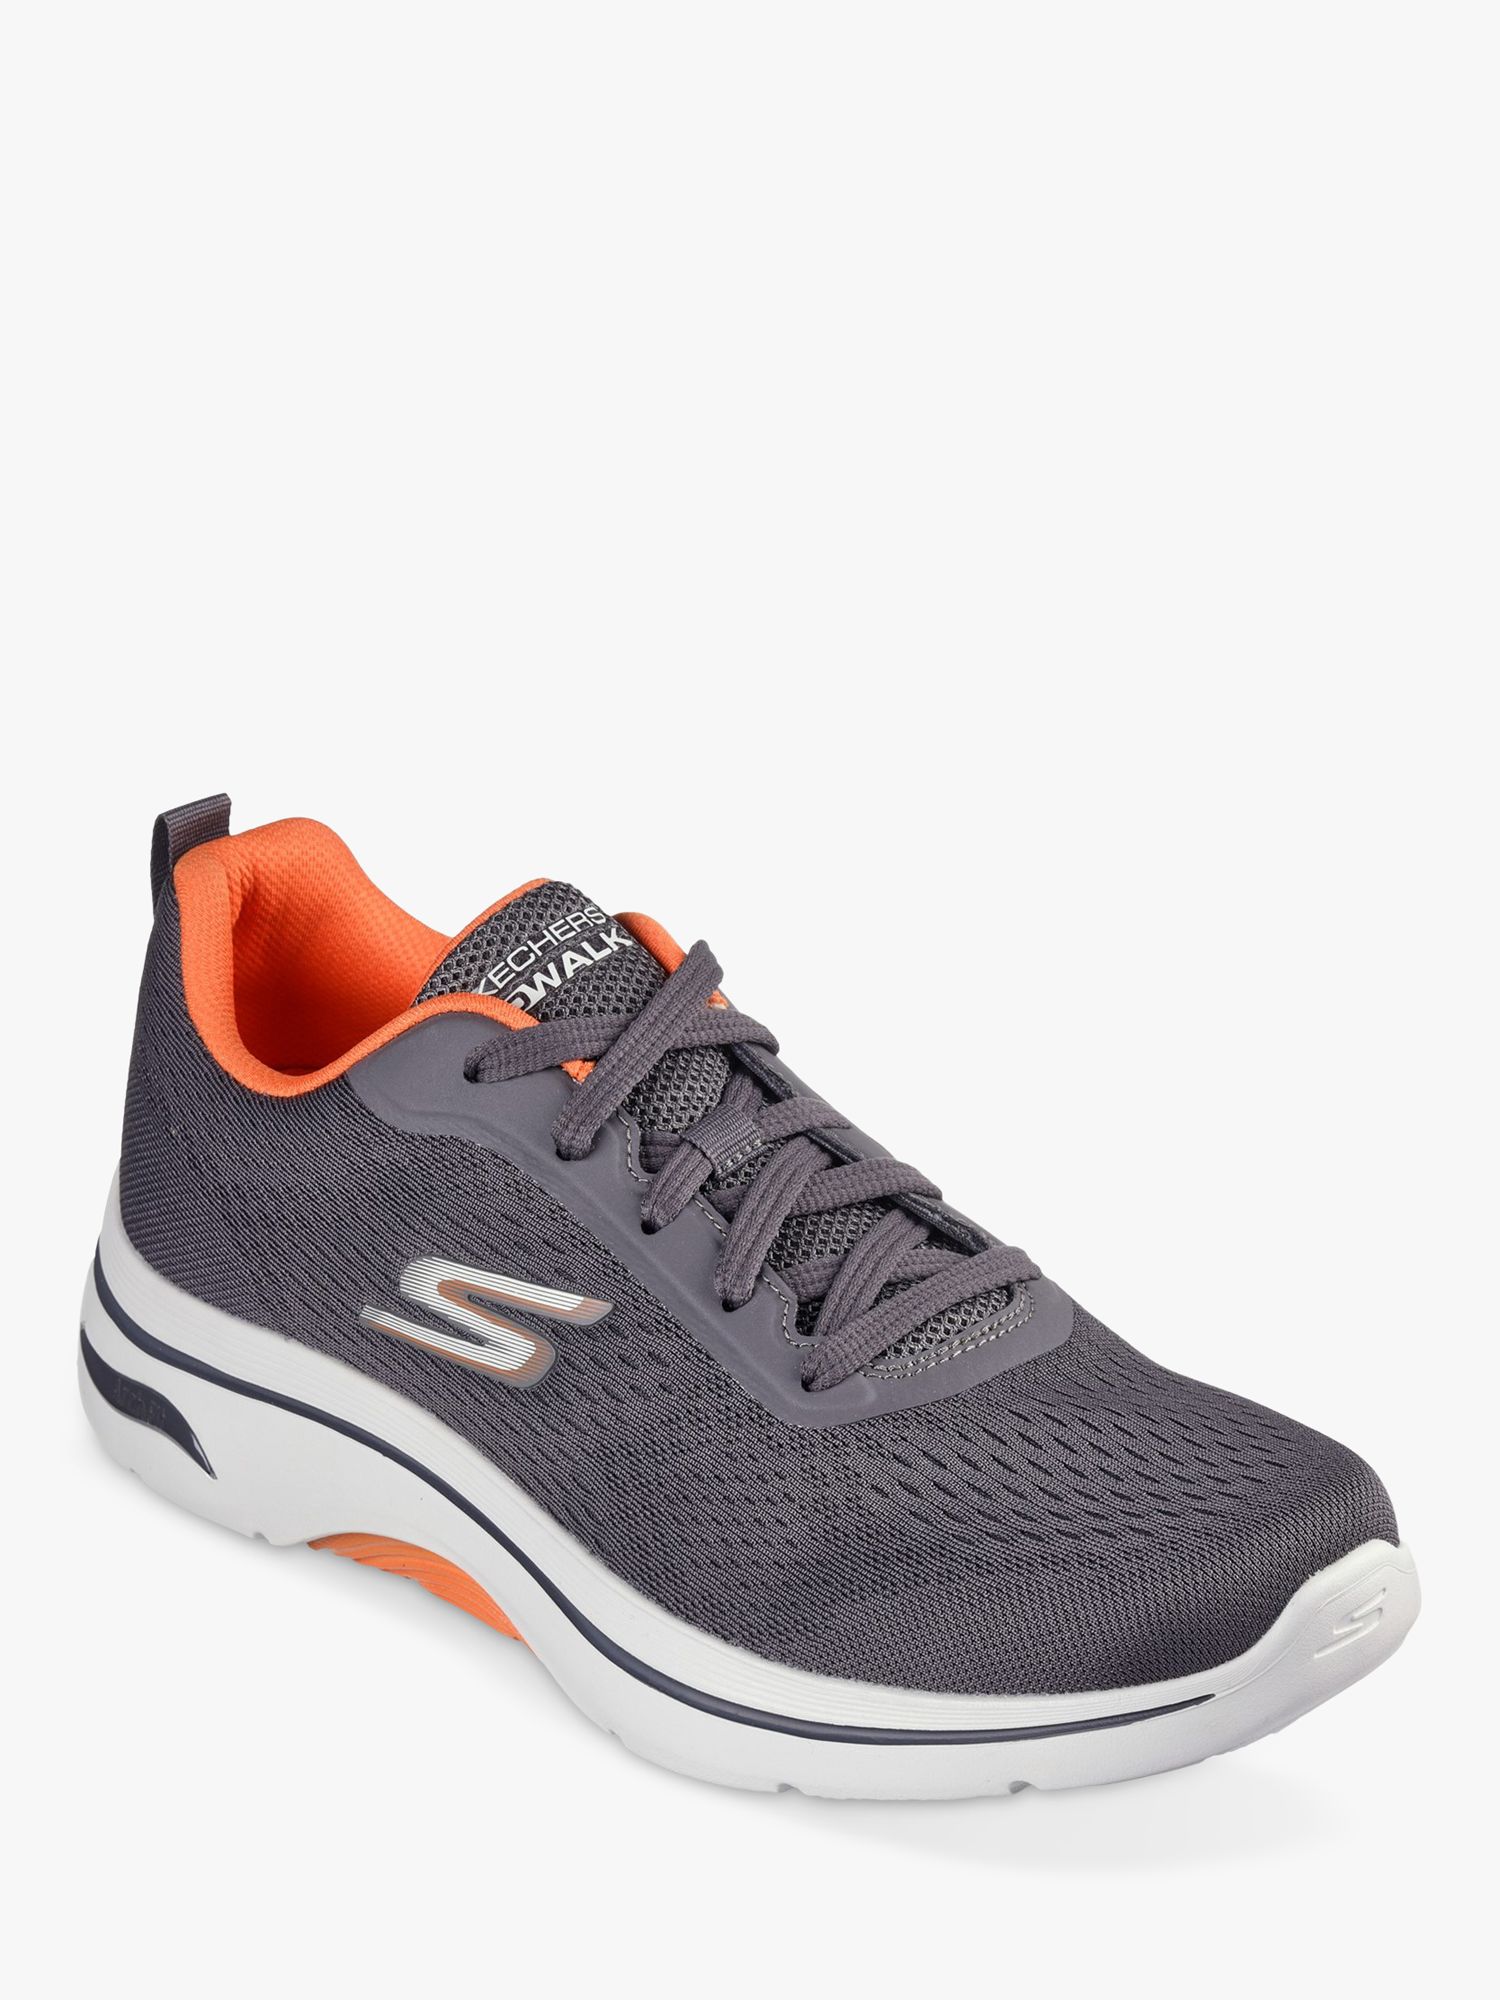 Buy Skechers Go Walk Arch Fit 2.0 Idyllic Trainers Online at johnlewis.com